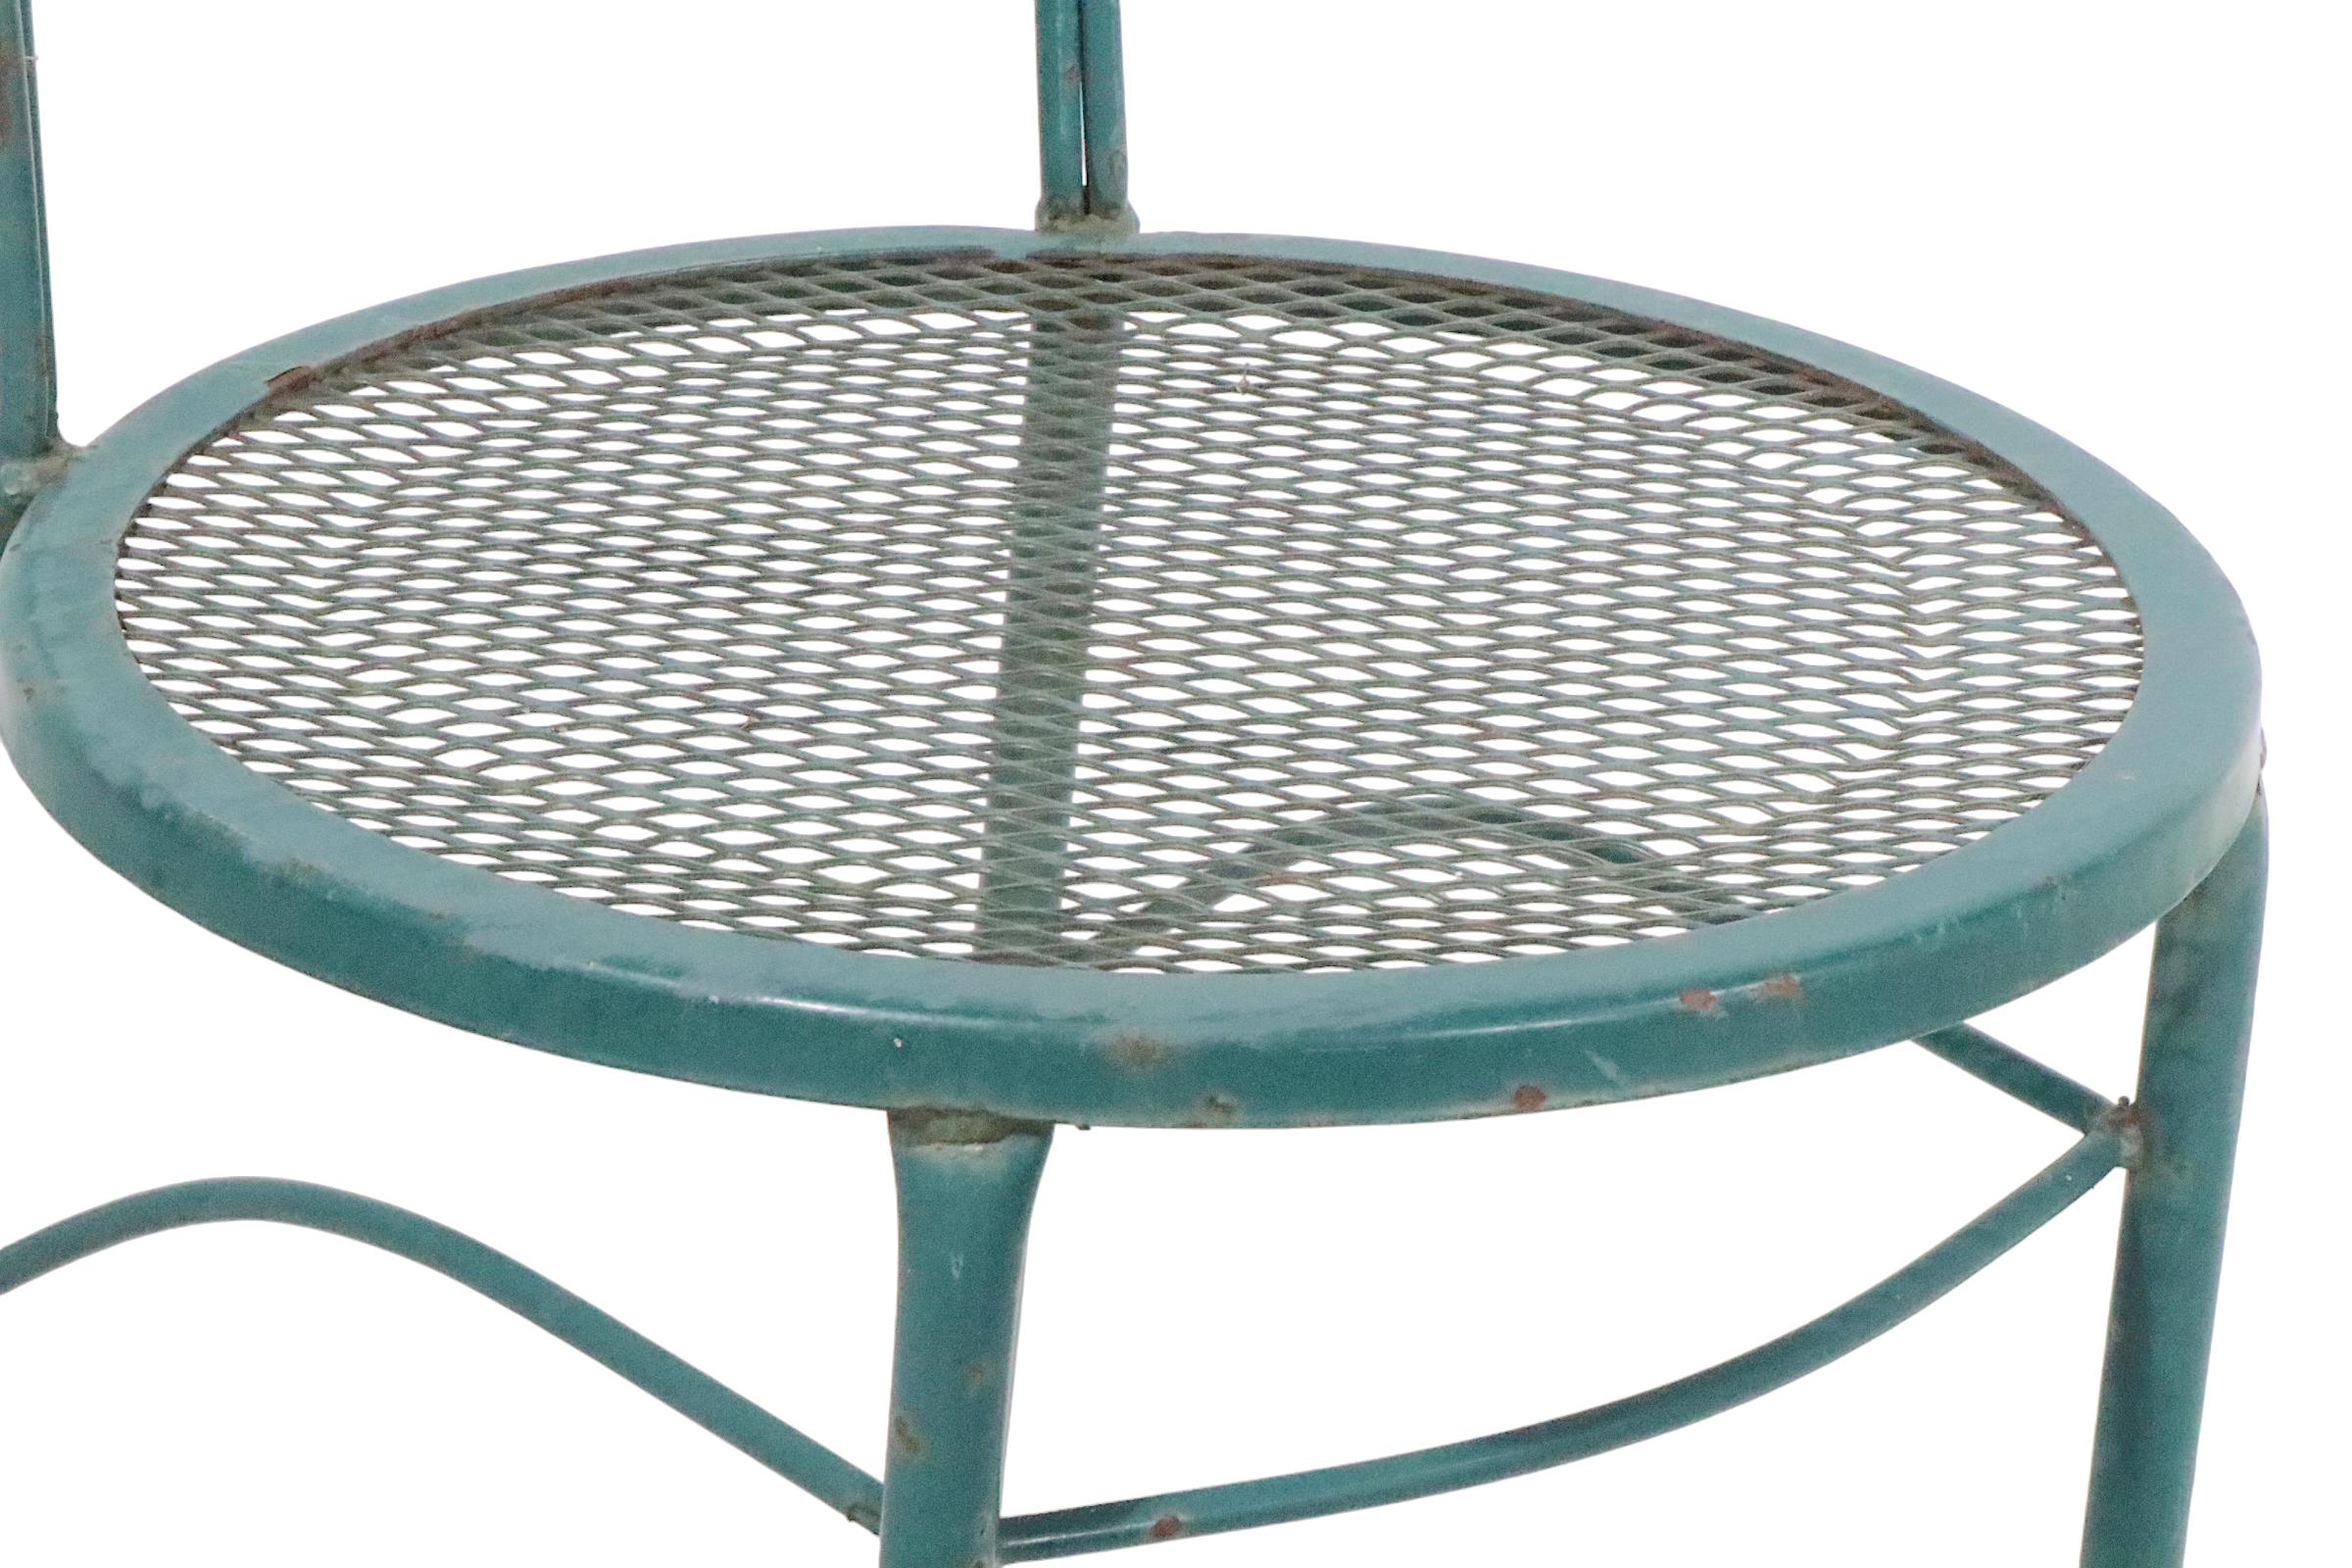 Super chic and voguish pair of wrought iron, metal, and metal mesh garden, patio, or poolside dining height chairs. The chairs feature a curved  tubular backrest , wrought iron frame, and metal mesh seats. Both chairs are structurally sound and